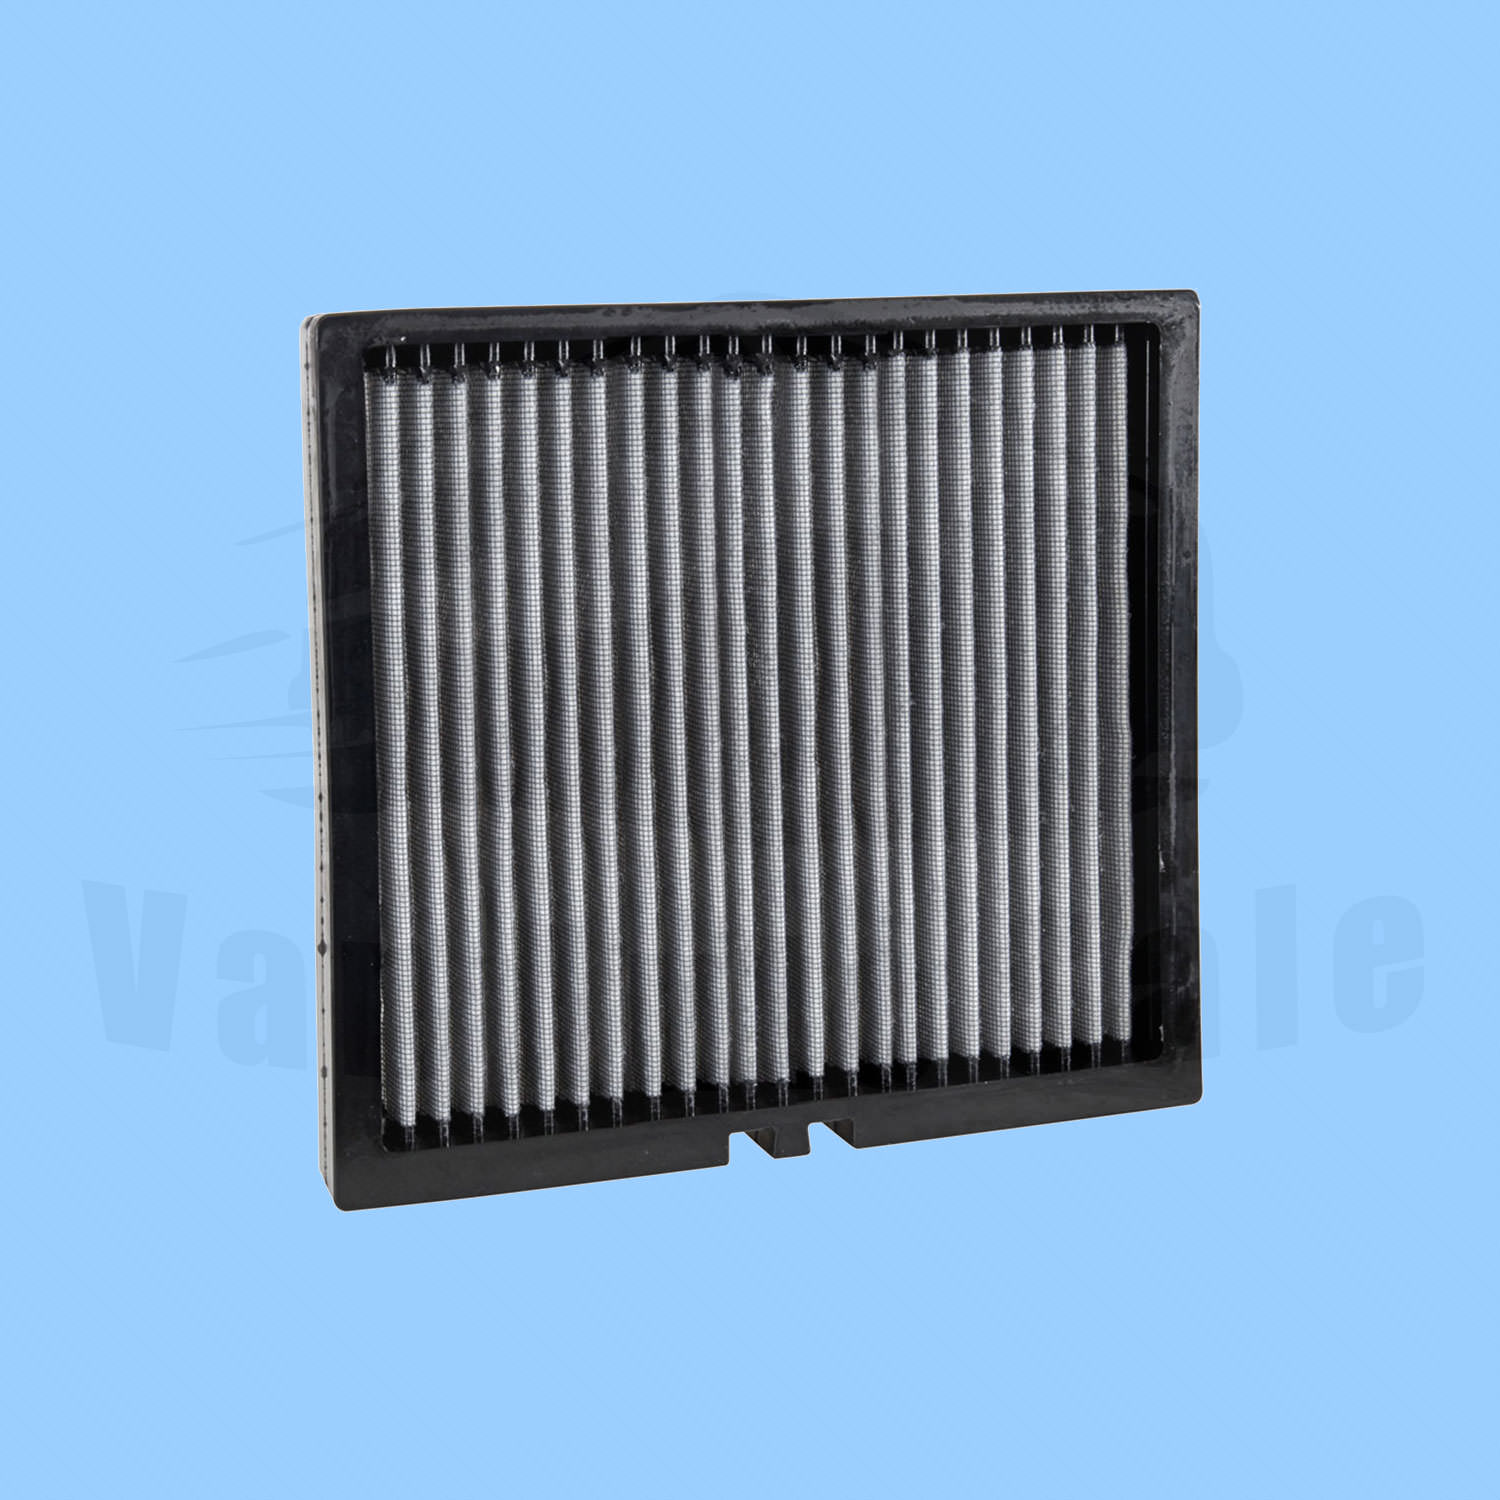 Cabin Air Filter K&N for Jeep Grand Cherokee 2011-2020 | eBay Cabin Air Filter 2020 Jeep Grand Cherokee